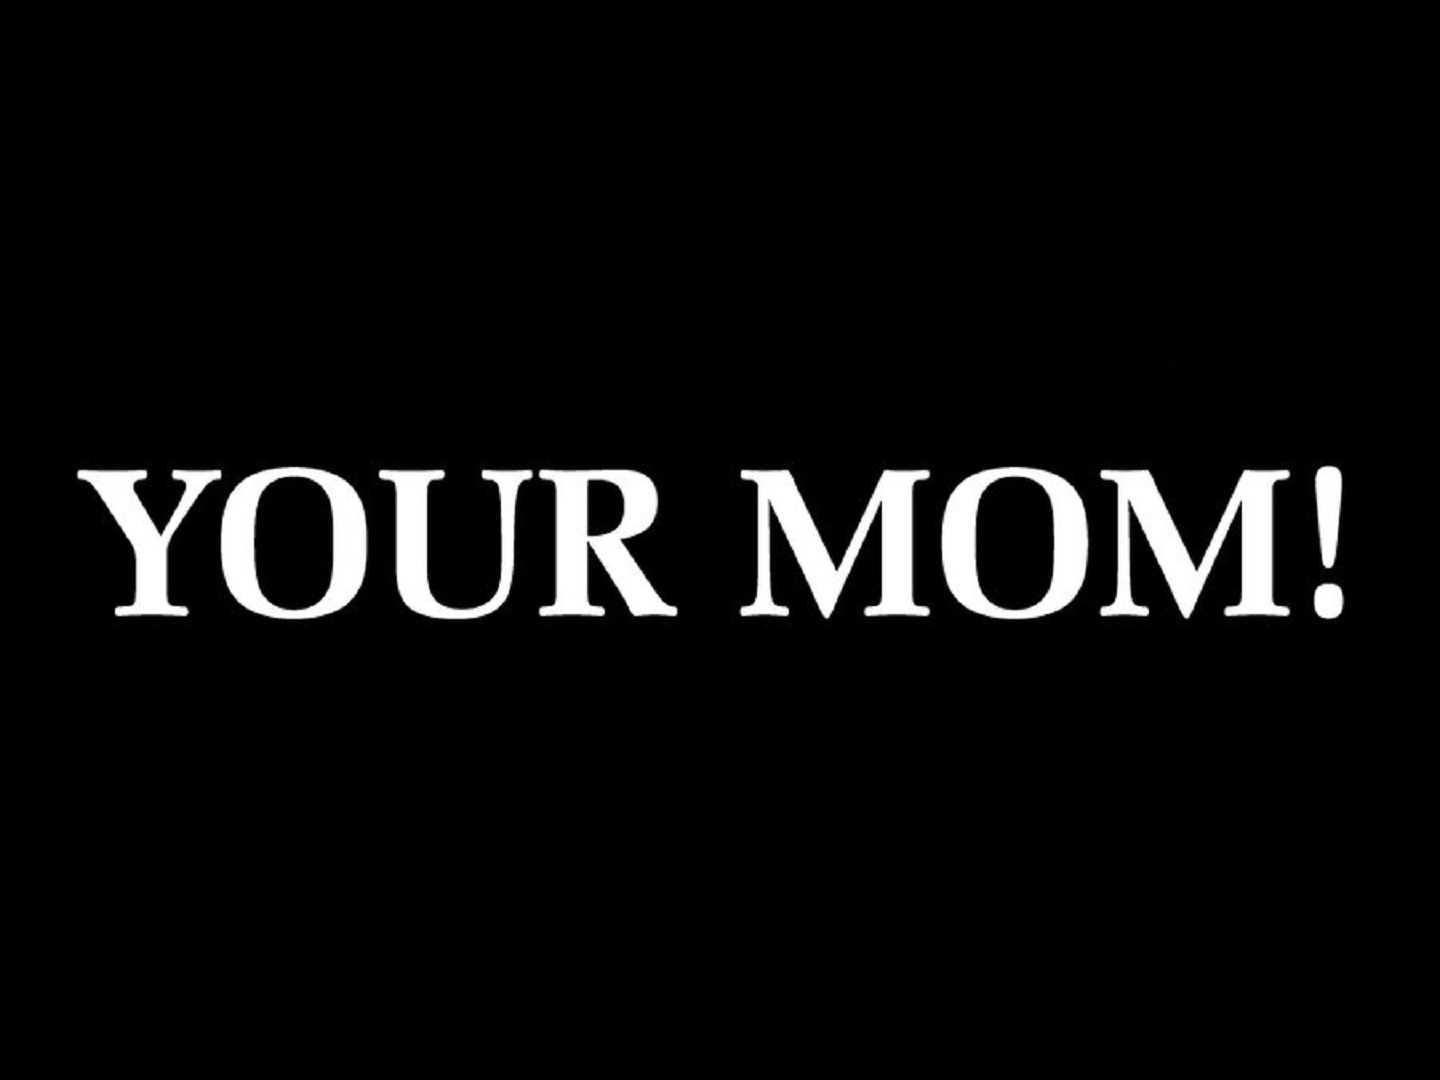 Download Your Mom Wallpaper 1